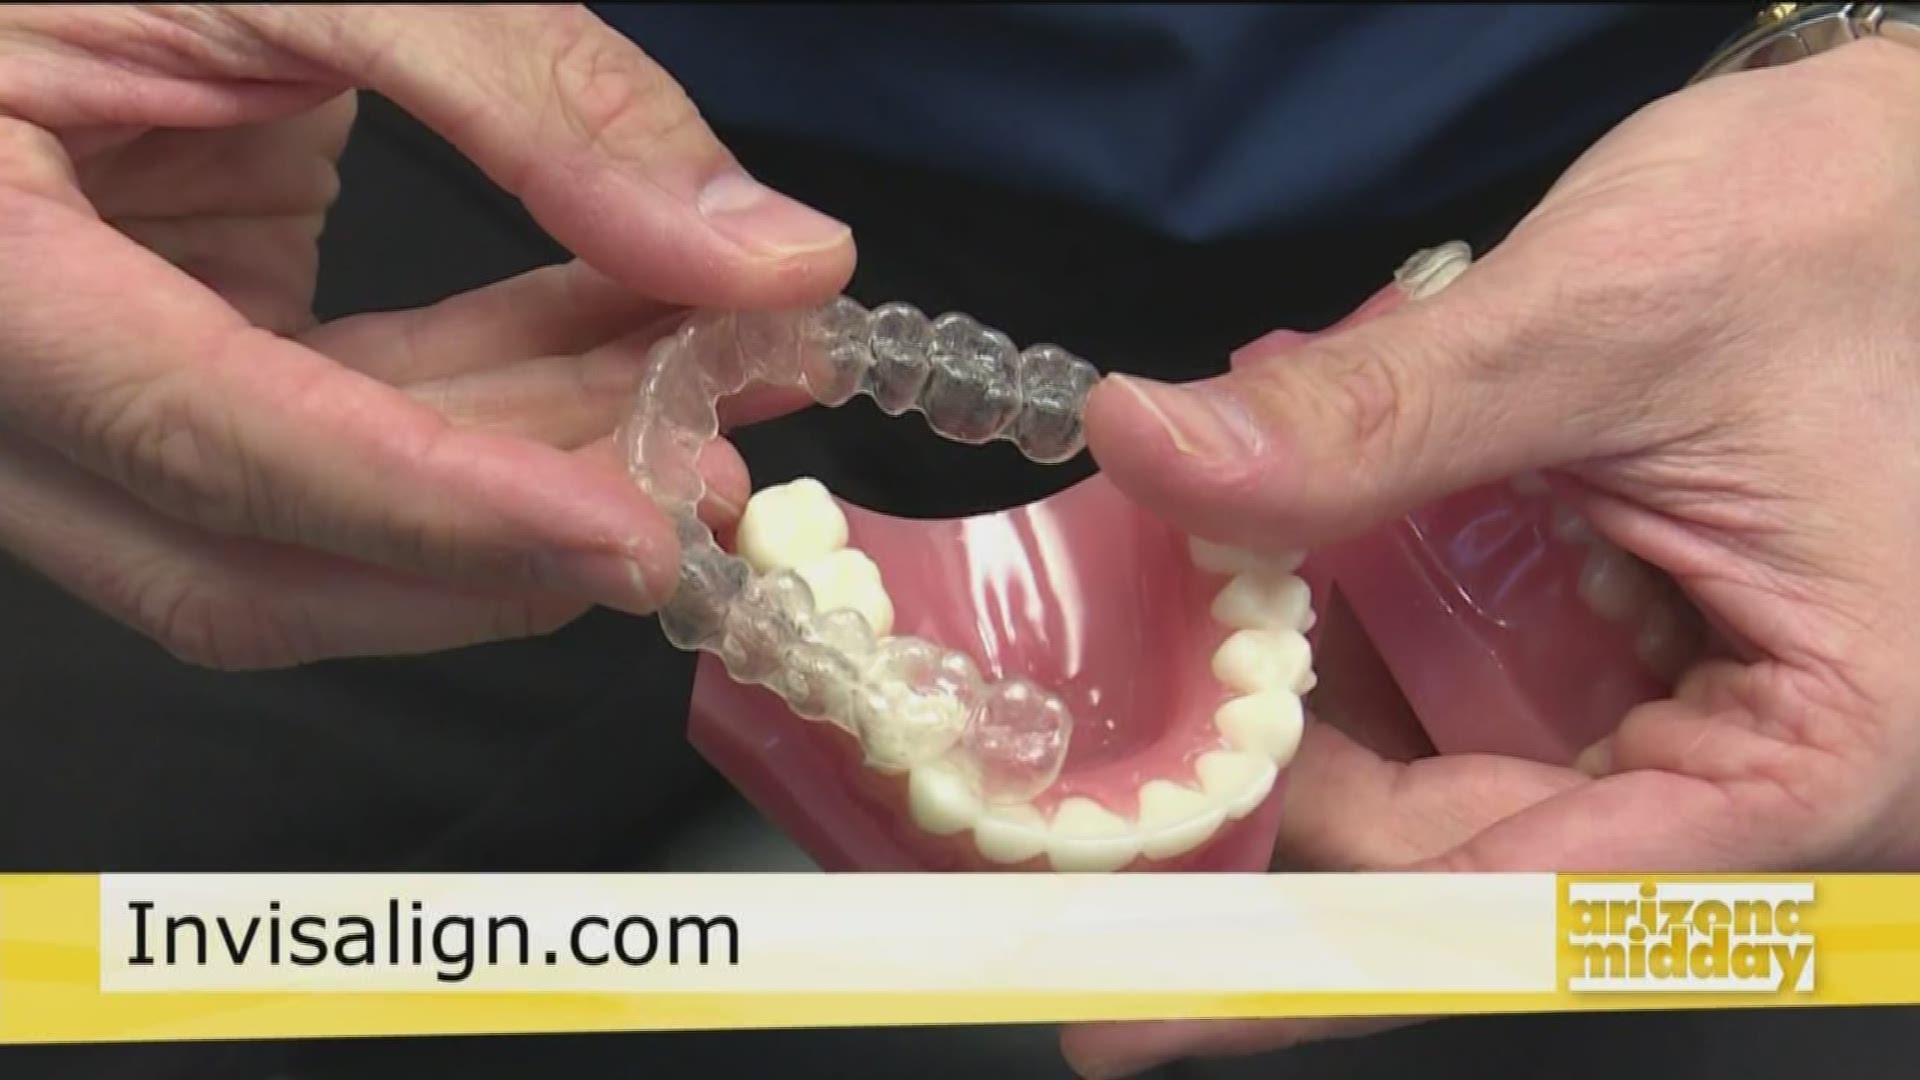 Dr. Benjamin Larrabee shares what patients can expect with the Invisalign Swift process and how it's changing the way we look at braces!